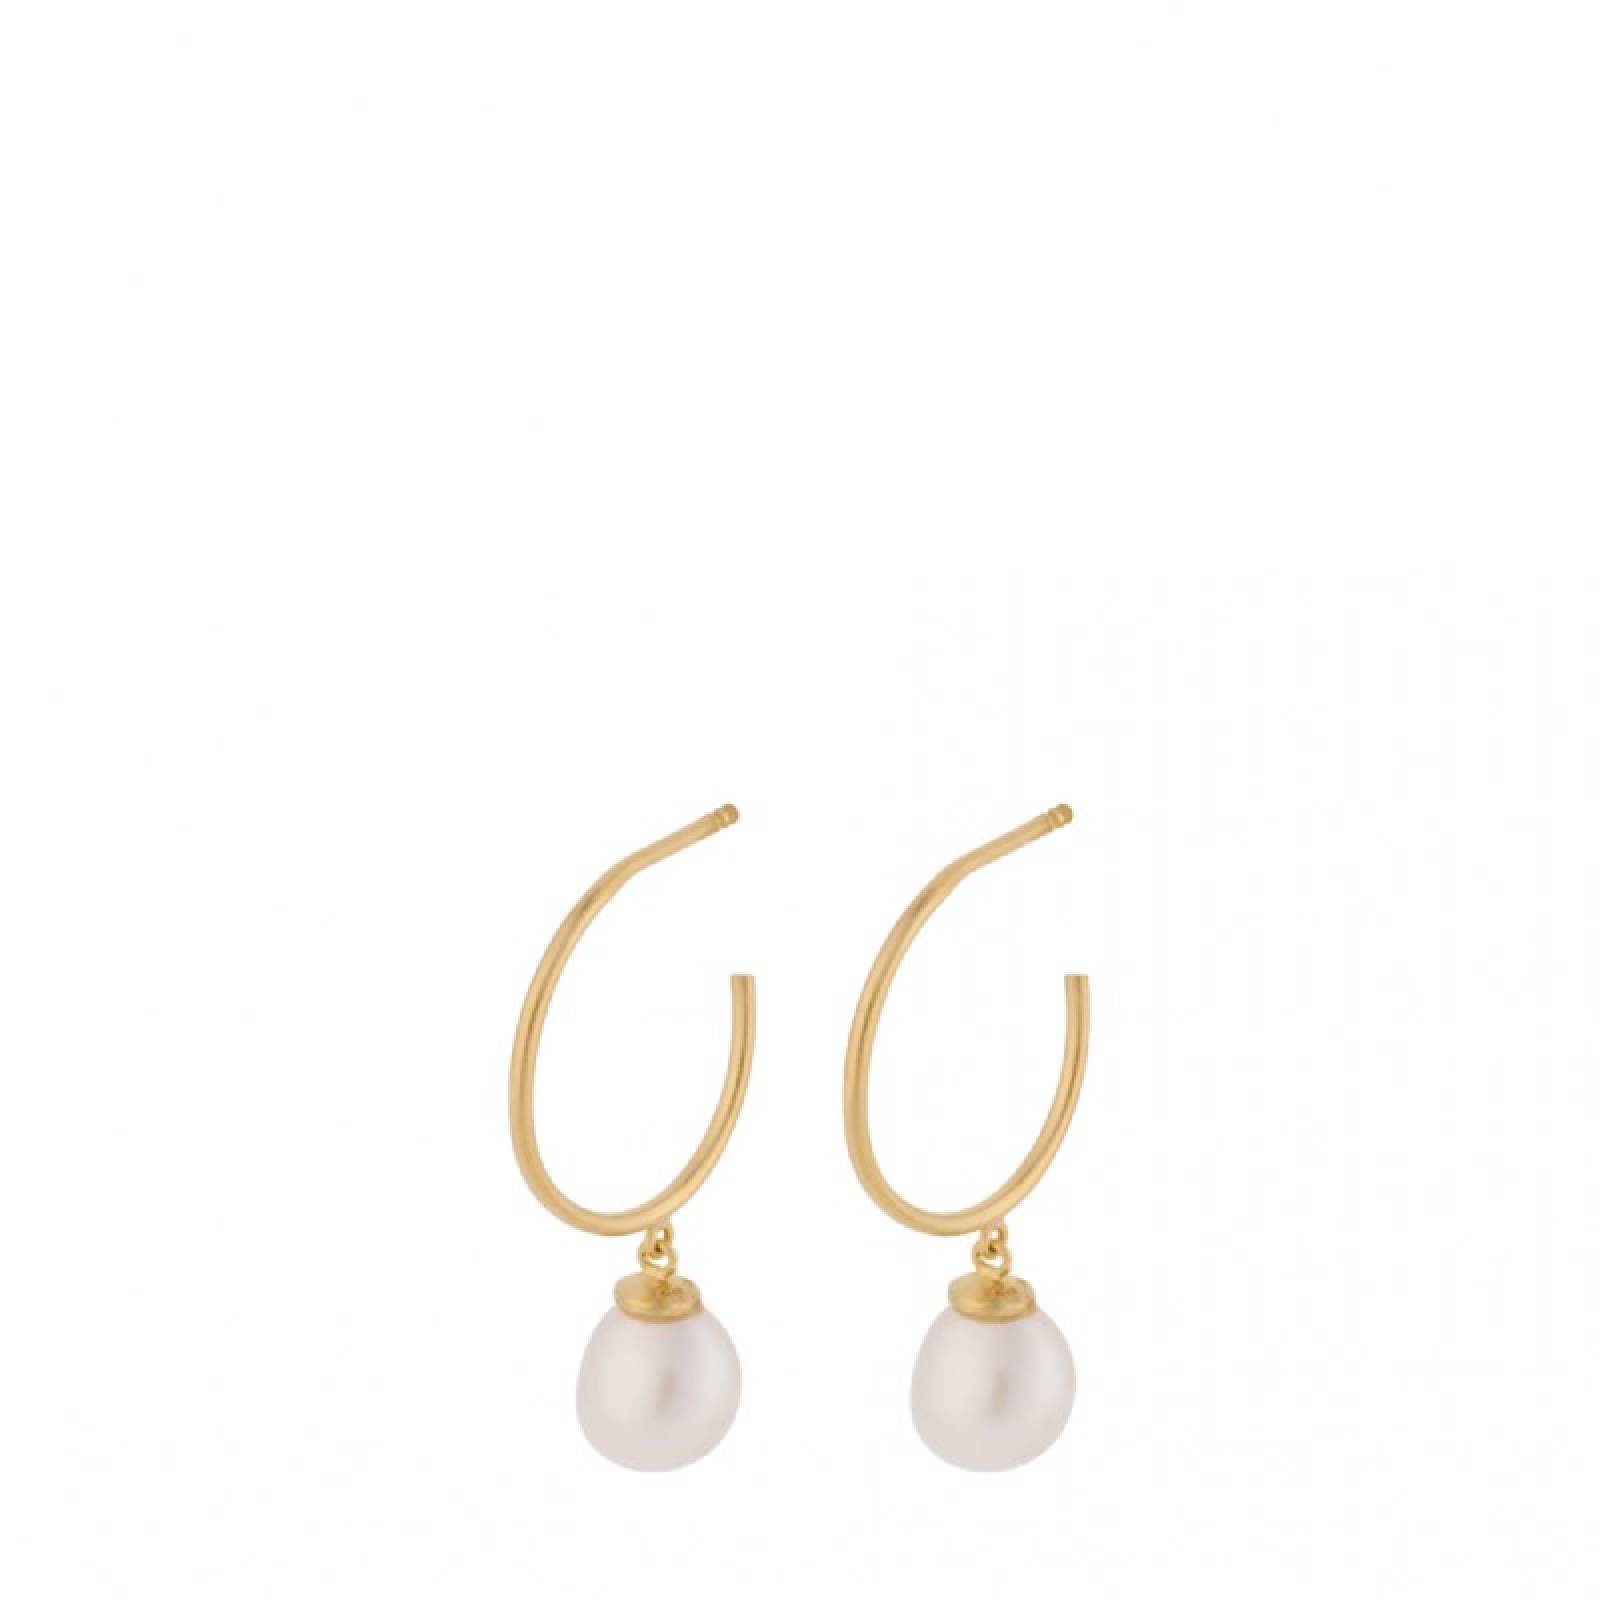 Ocean Dream Hoops In Gold With Pearl Drop By Pernille Corydon